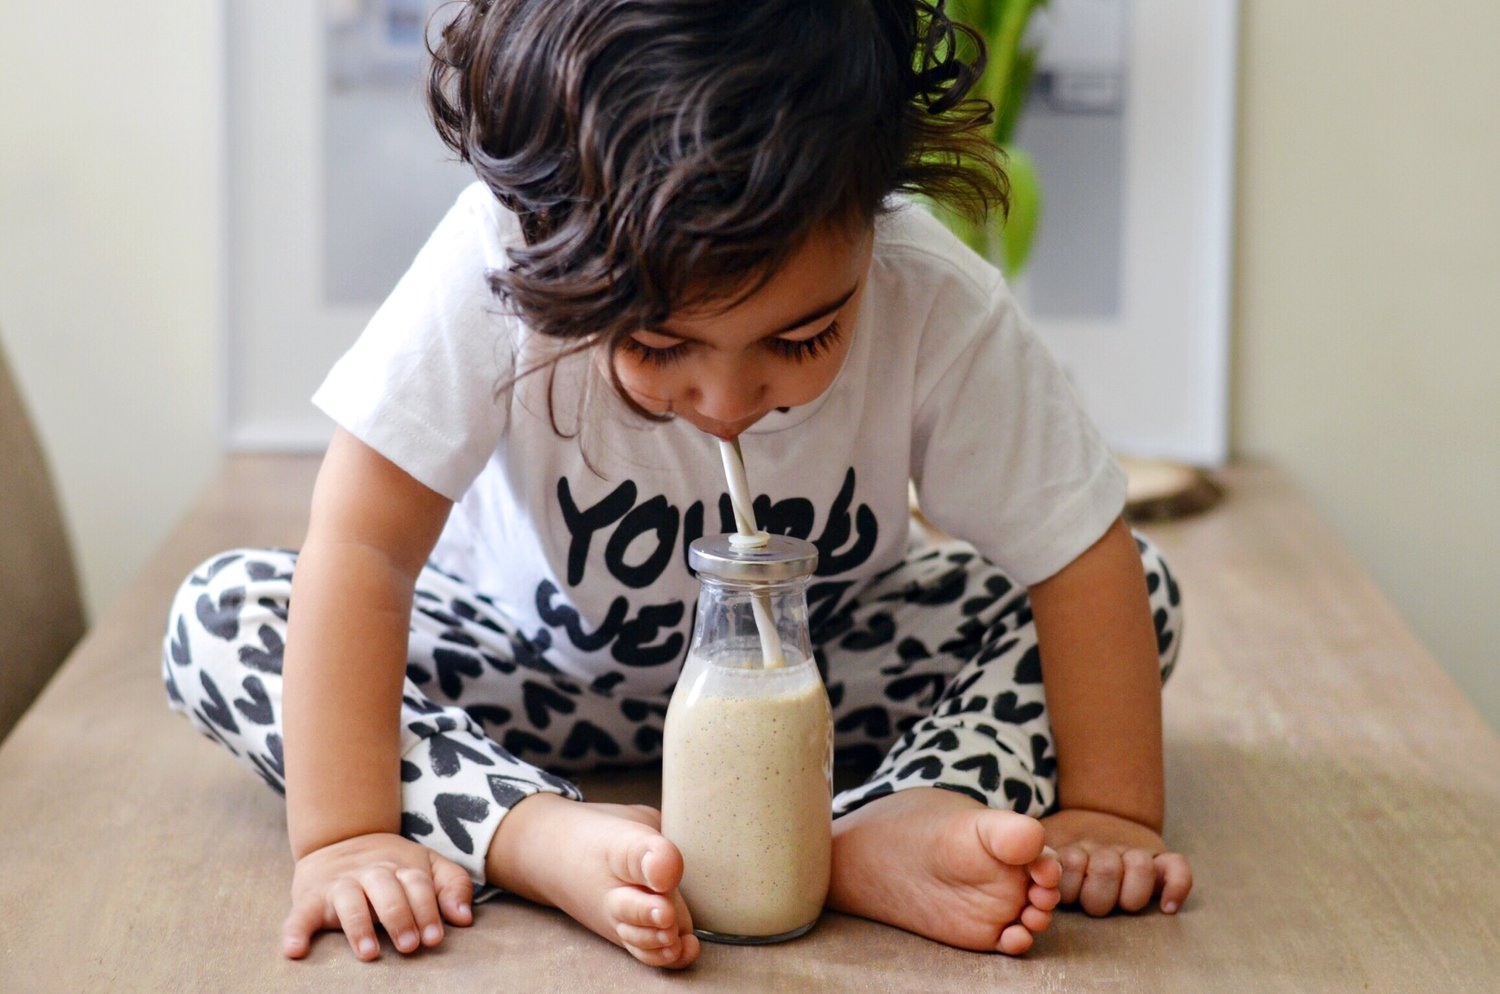 Toddler healthy snack smoothie recipe - lot801 Black Hearts leggings